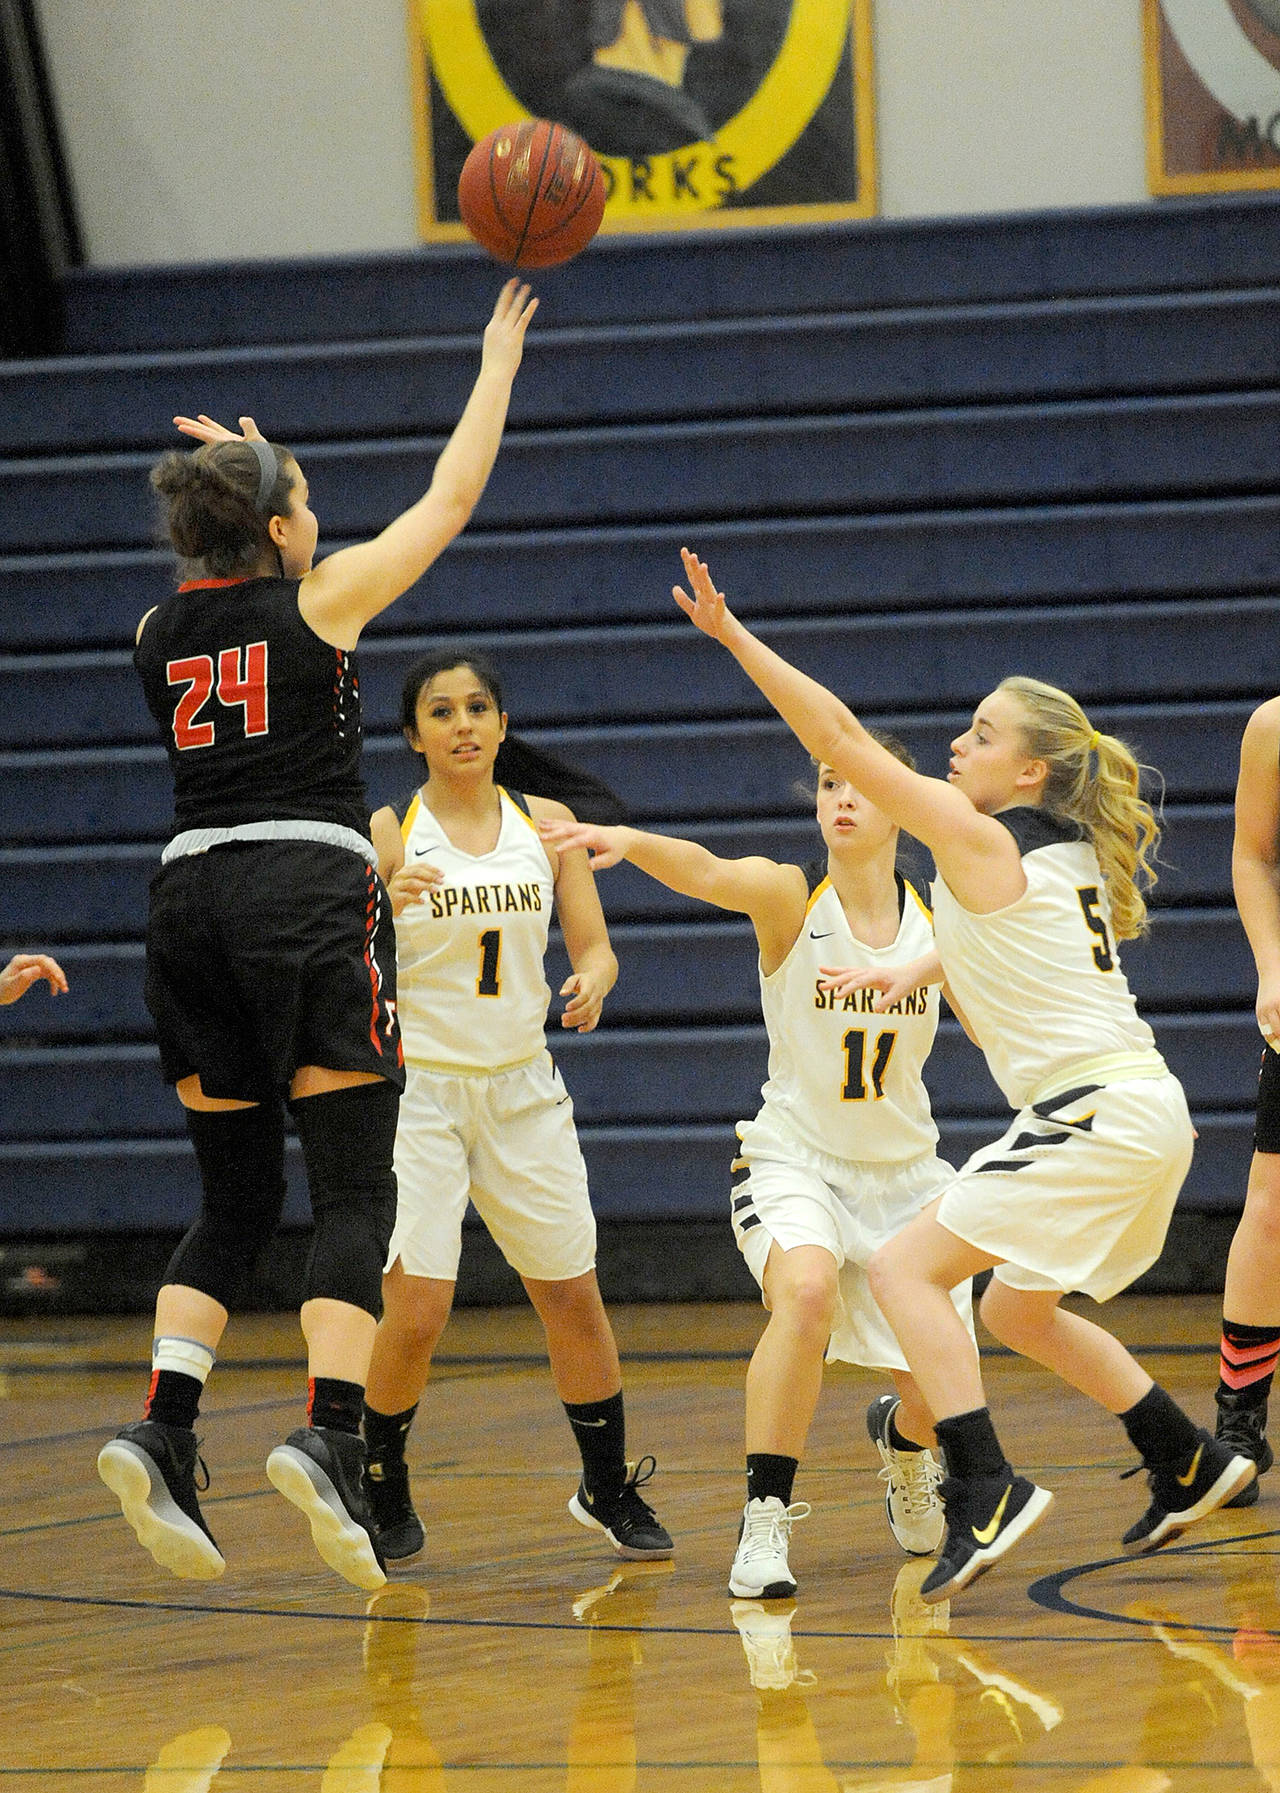 Lonnie Archibald/for Peninsula Daily News Forks seniors from left, Cassandra Vasquez, Sage Baar and Bailee kratzer defend against Tenino’s Kaylee Schow during the Spartans’ 42-30 senior night victory.